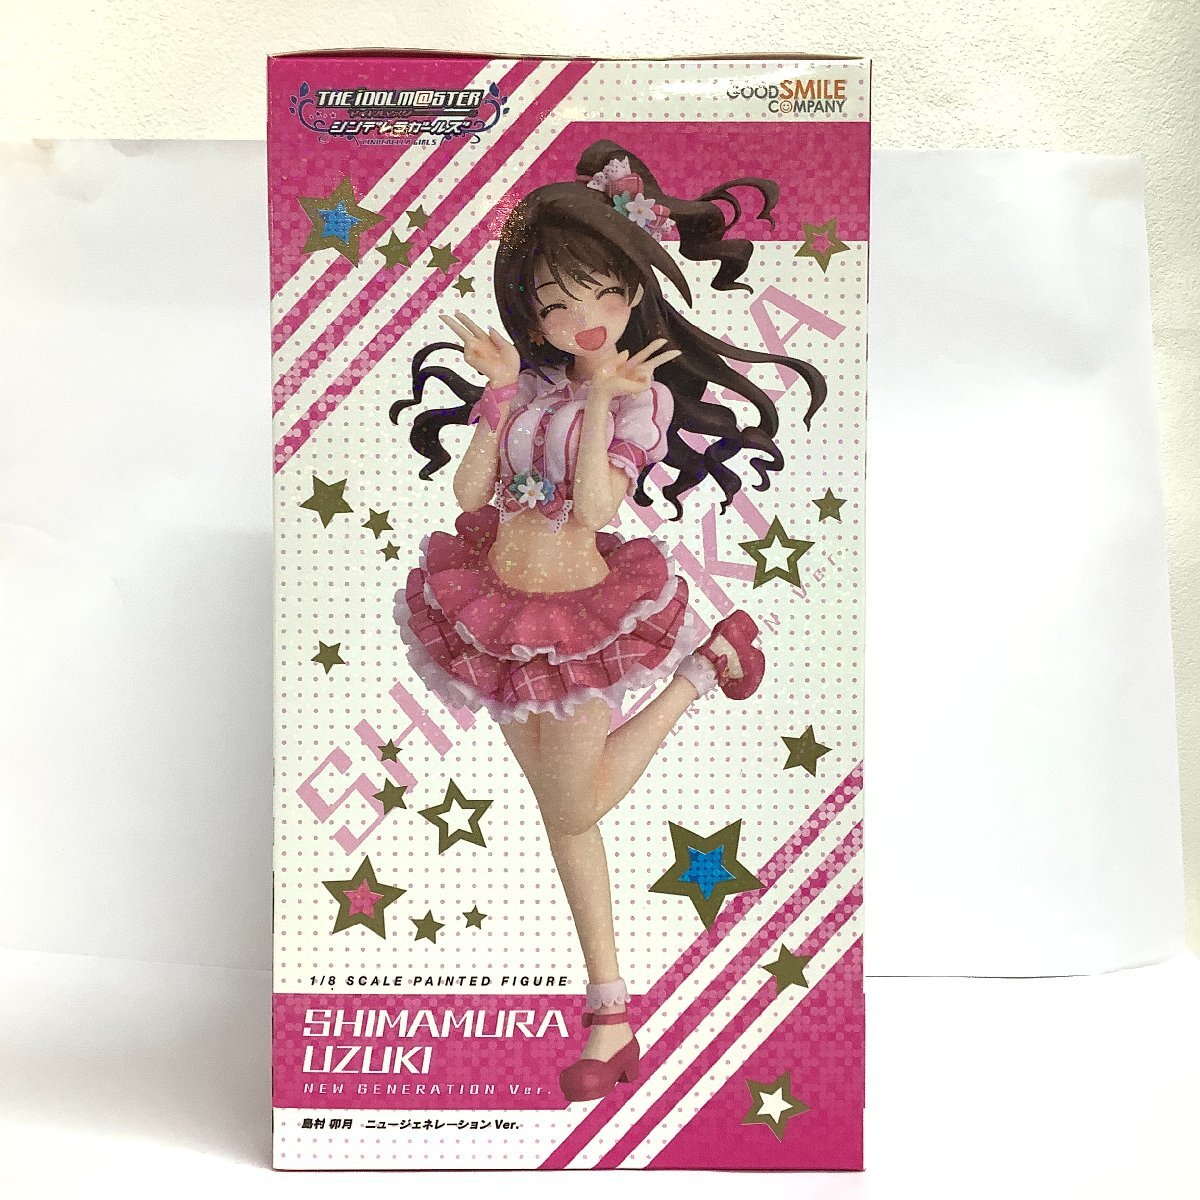 [ unopened ] 1/8 scale island .. month new generation Ver. The Idol Master sinterela girls tere trout gdo Smile Company 